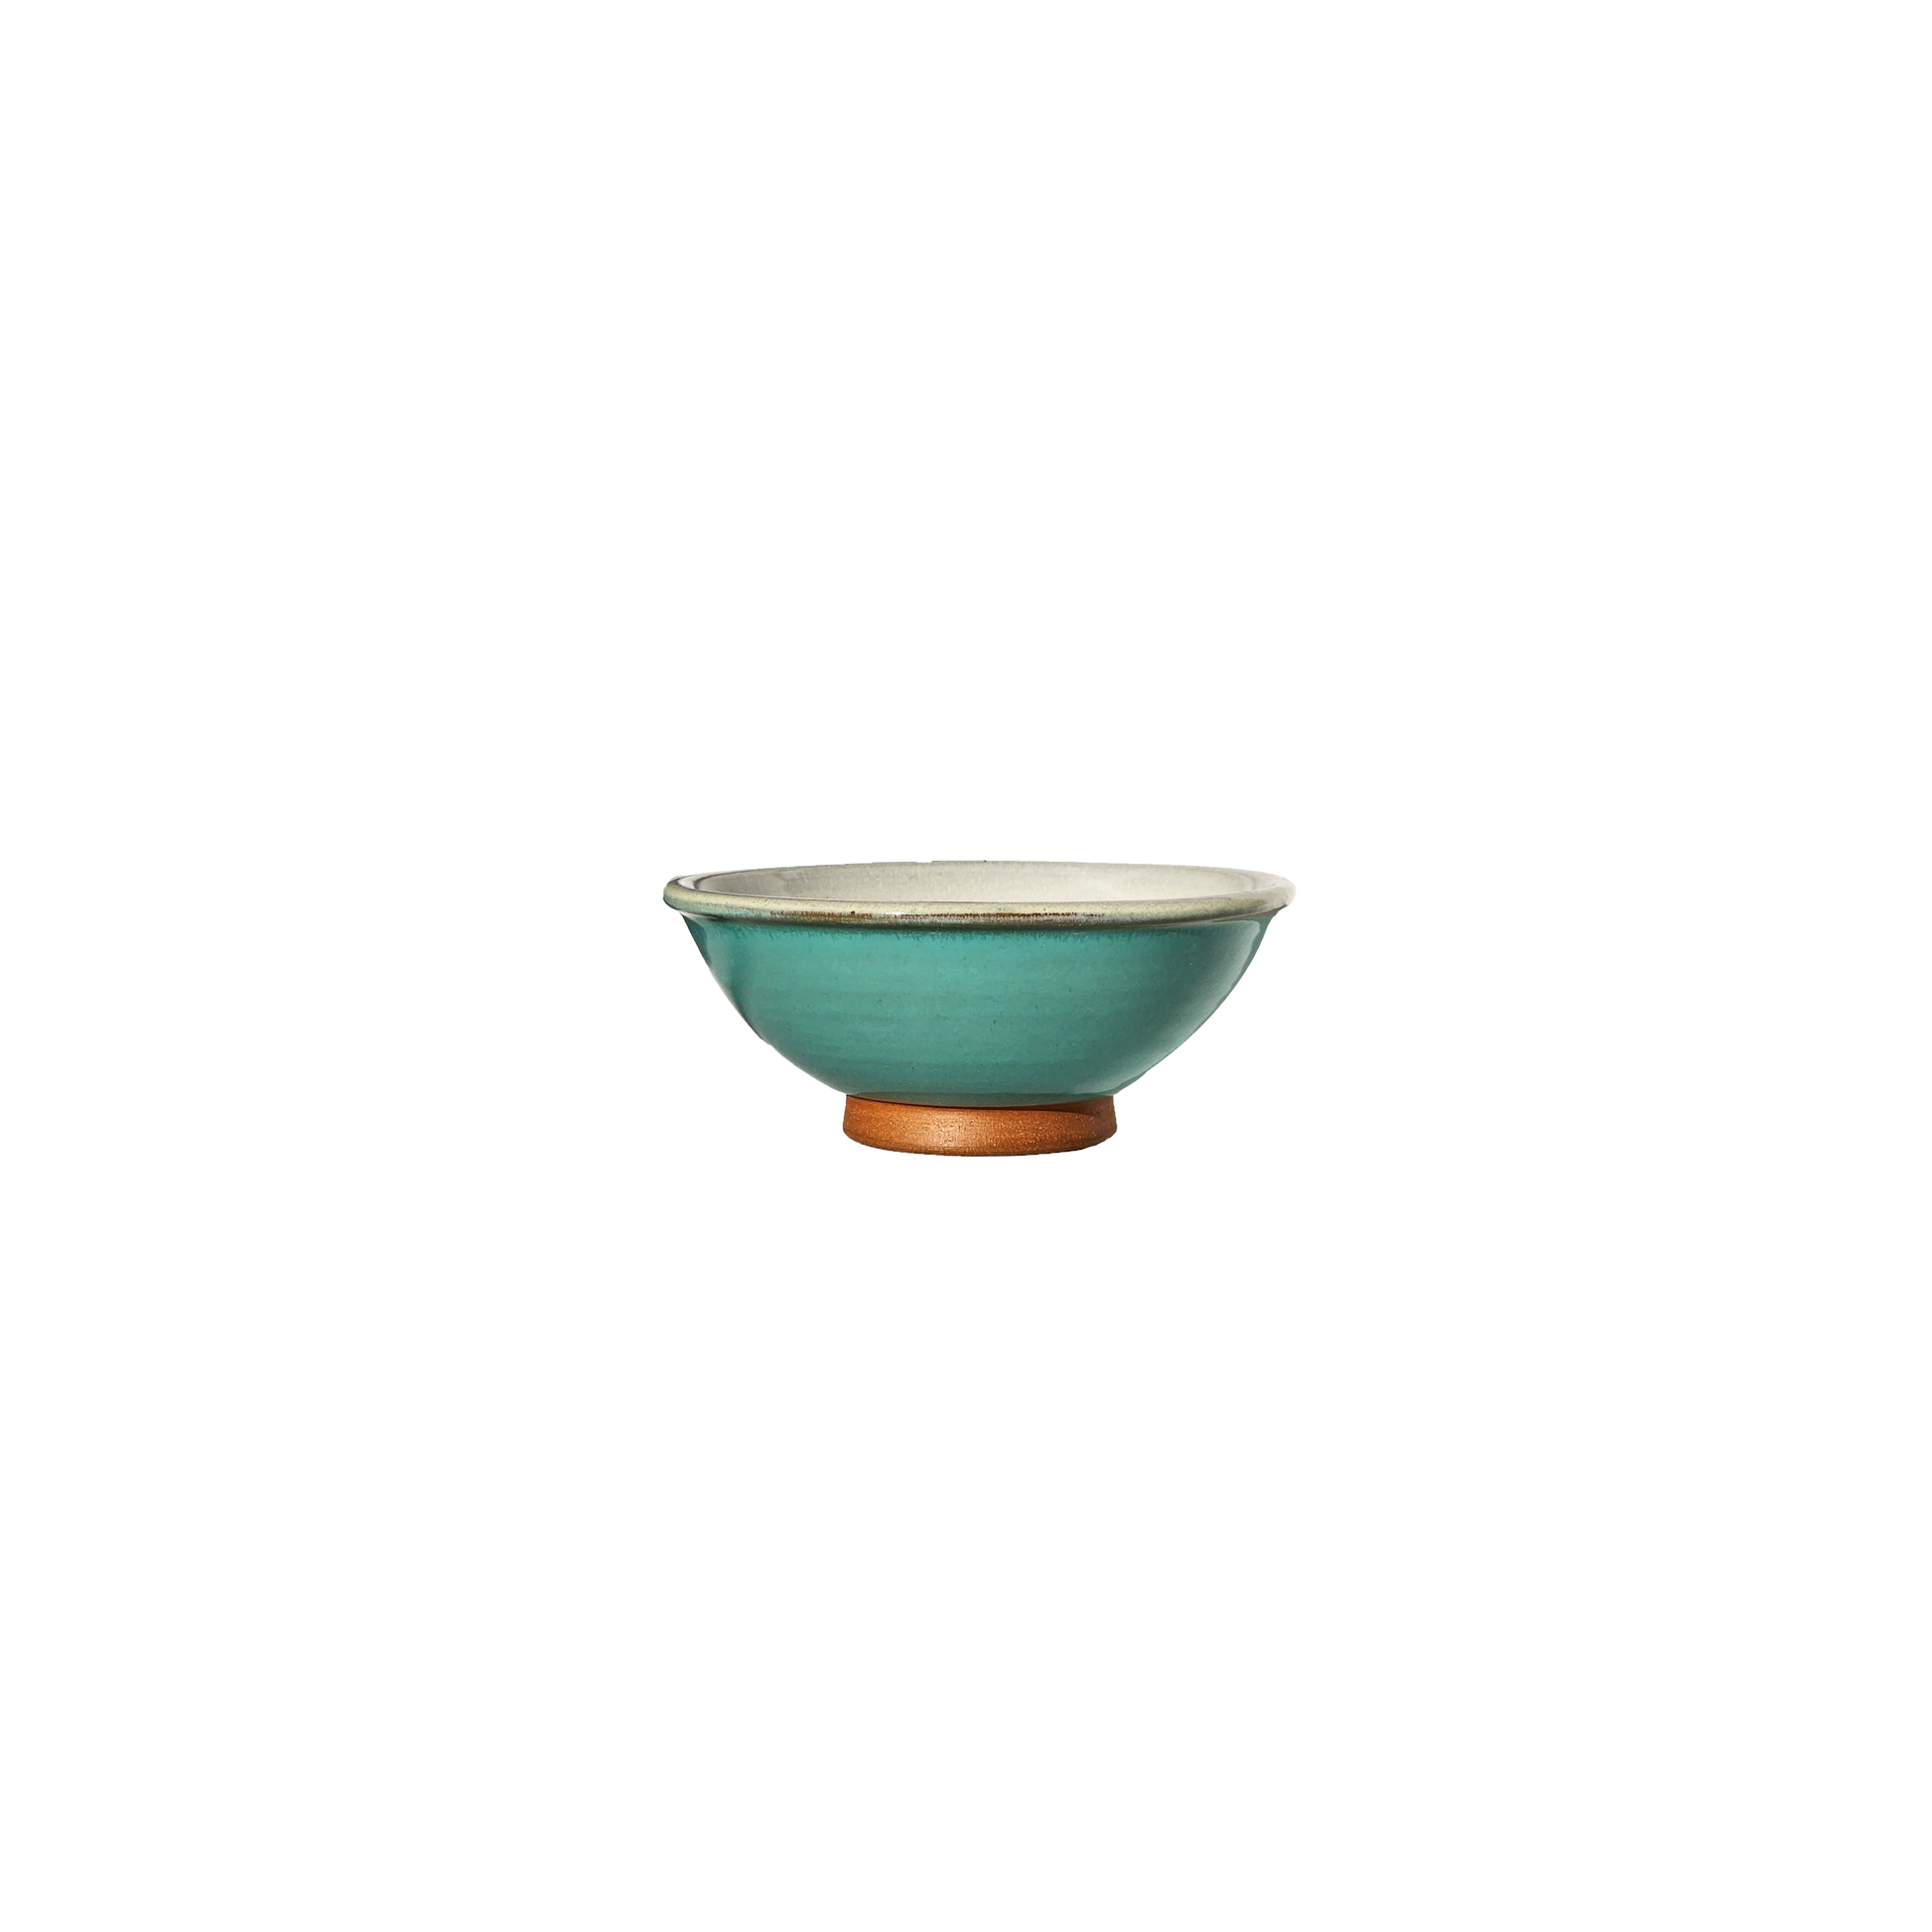 Image:  Channel the tranquility of a clear sky with this sky blue sugar bowl, creating a serene atmosphere at your table. Holds 4 ounces of sugar, providing a soothing addition to your tea or coffee service.